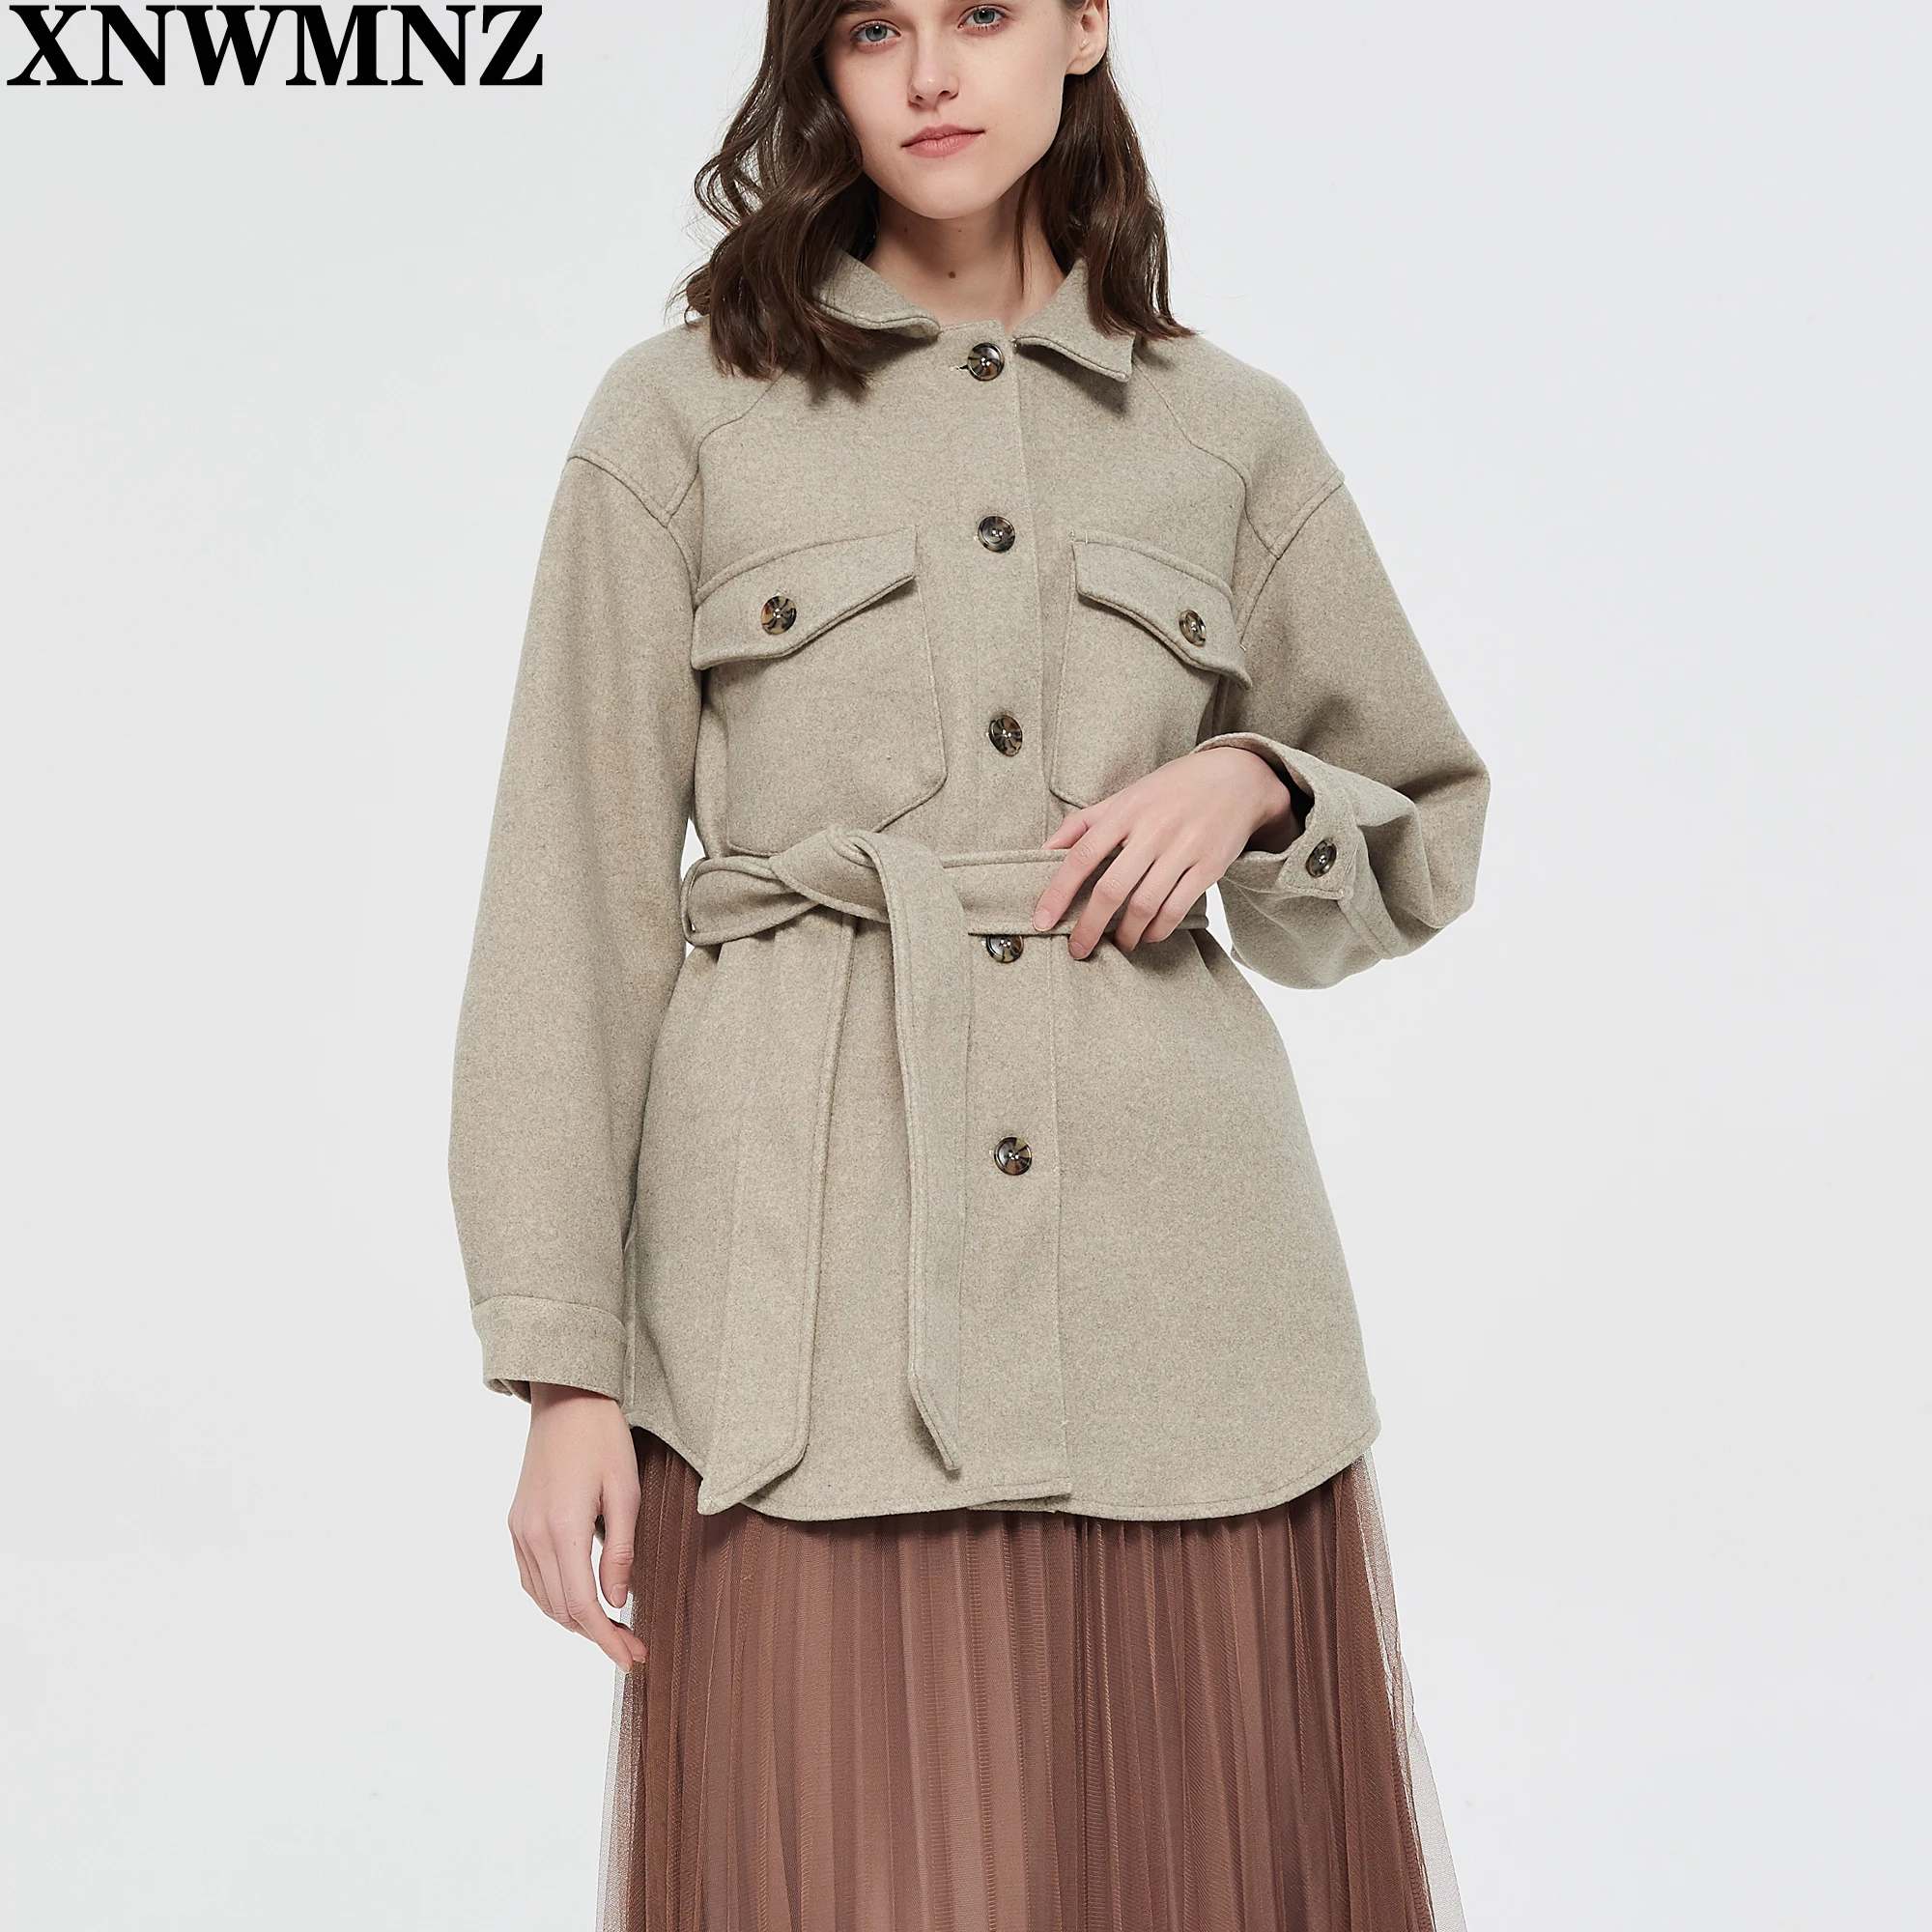 XNWMNZ Women 2021 Fashion With Belt Loose Woolen Jacket Coat Vintage Long Sleeve Side Pockets Female Outerwear Chic Overcoat 2021 solid color pockets wide leg pants jumpsuits women summer new casual bow sling loose rompers one piece outfit boho female